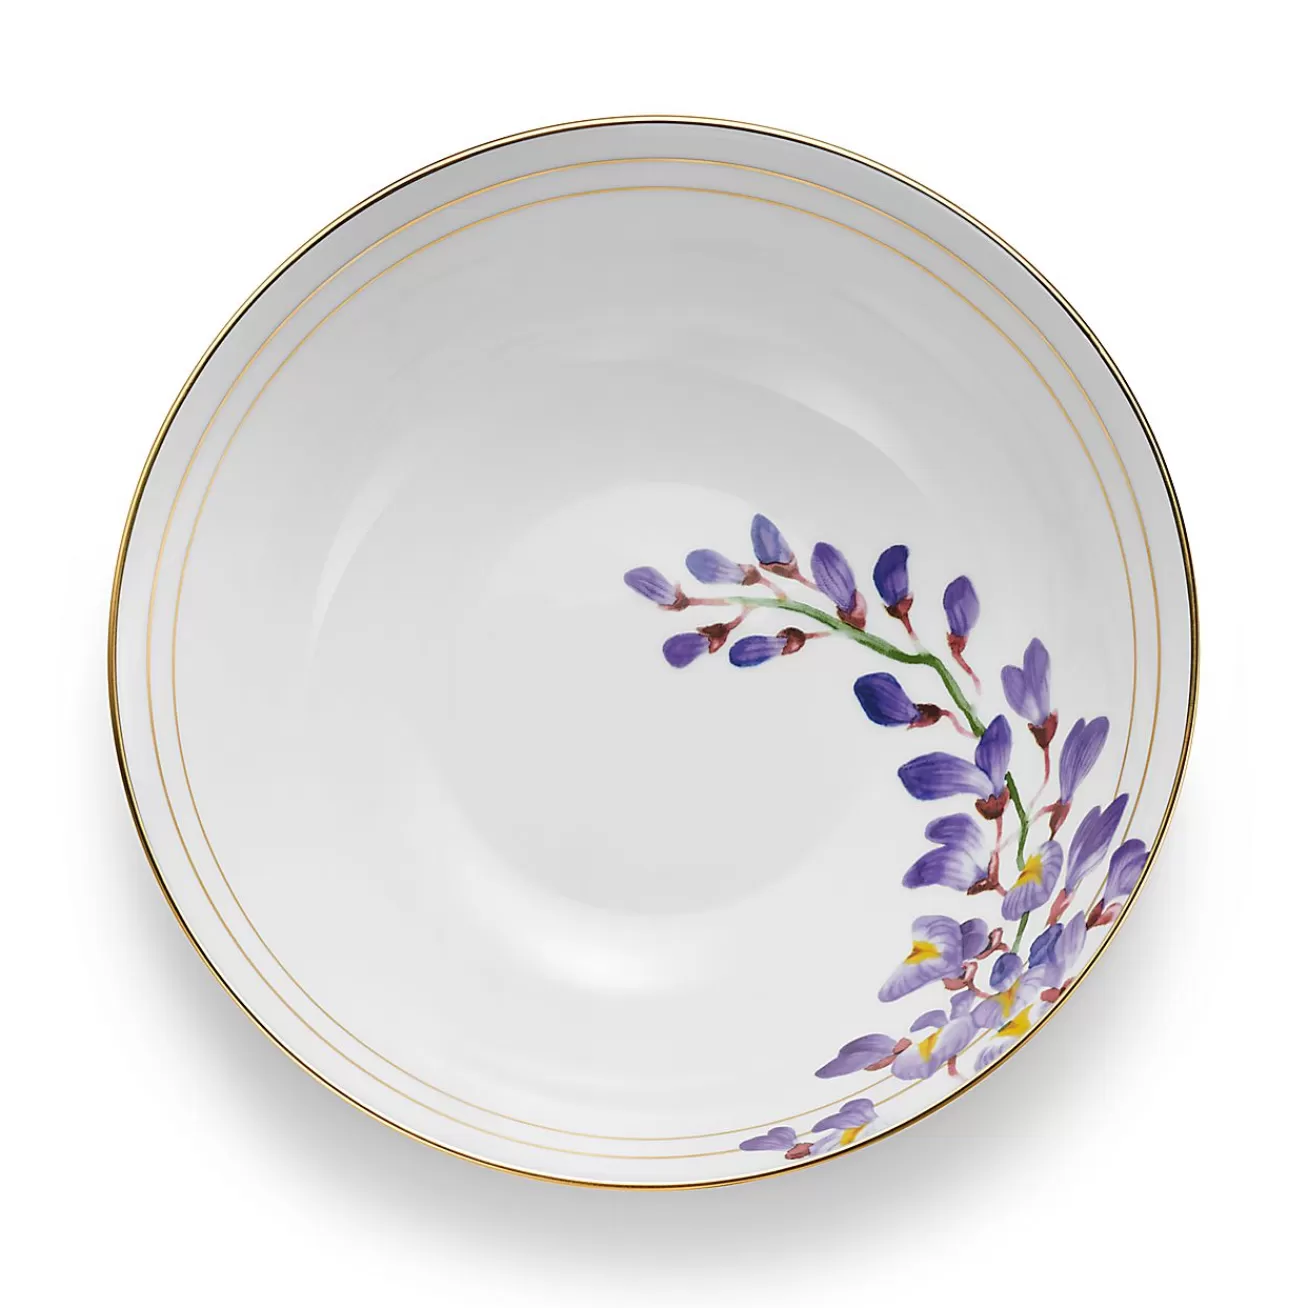 Tiffany & Co. Tiffany Wisteria Serving Bowl in Porcelain | ^ The Home | Housewarming Gifts